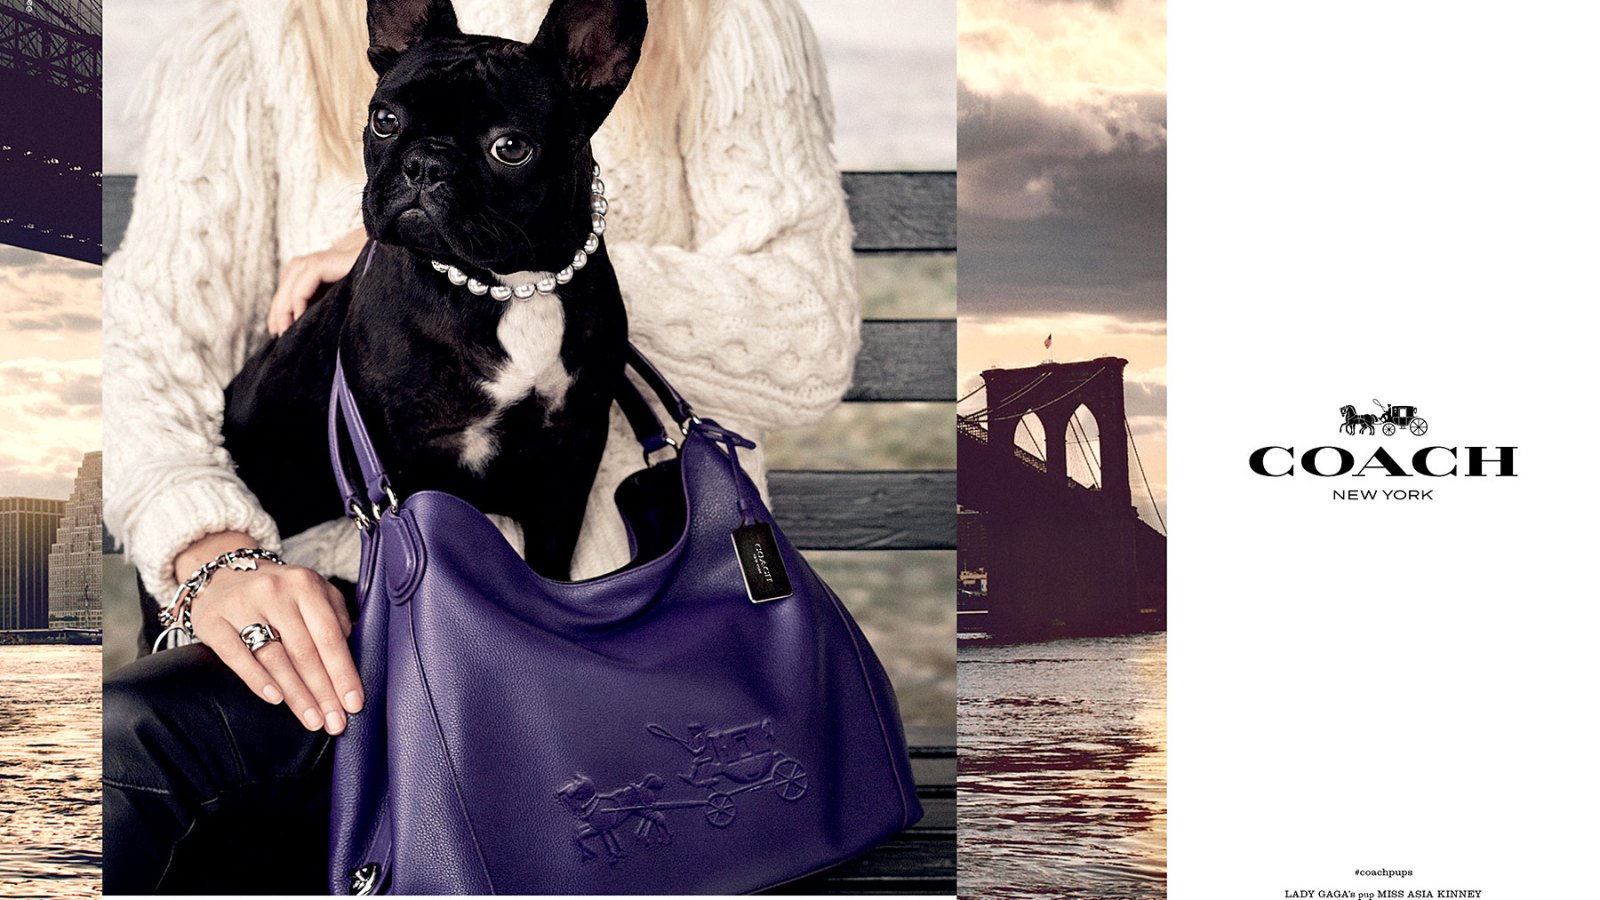 Miss Asia Kinney is featured in Coach's new campaign, "Coach Pups"